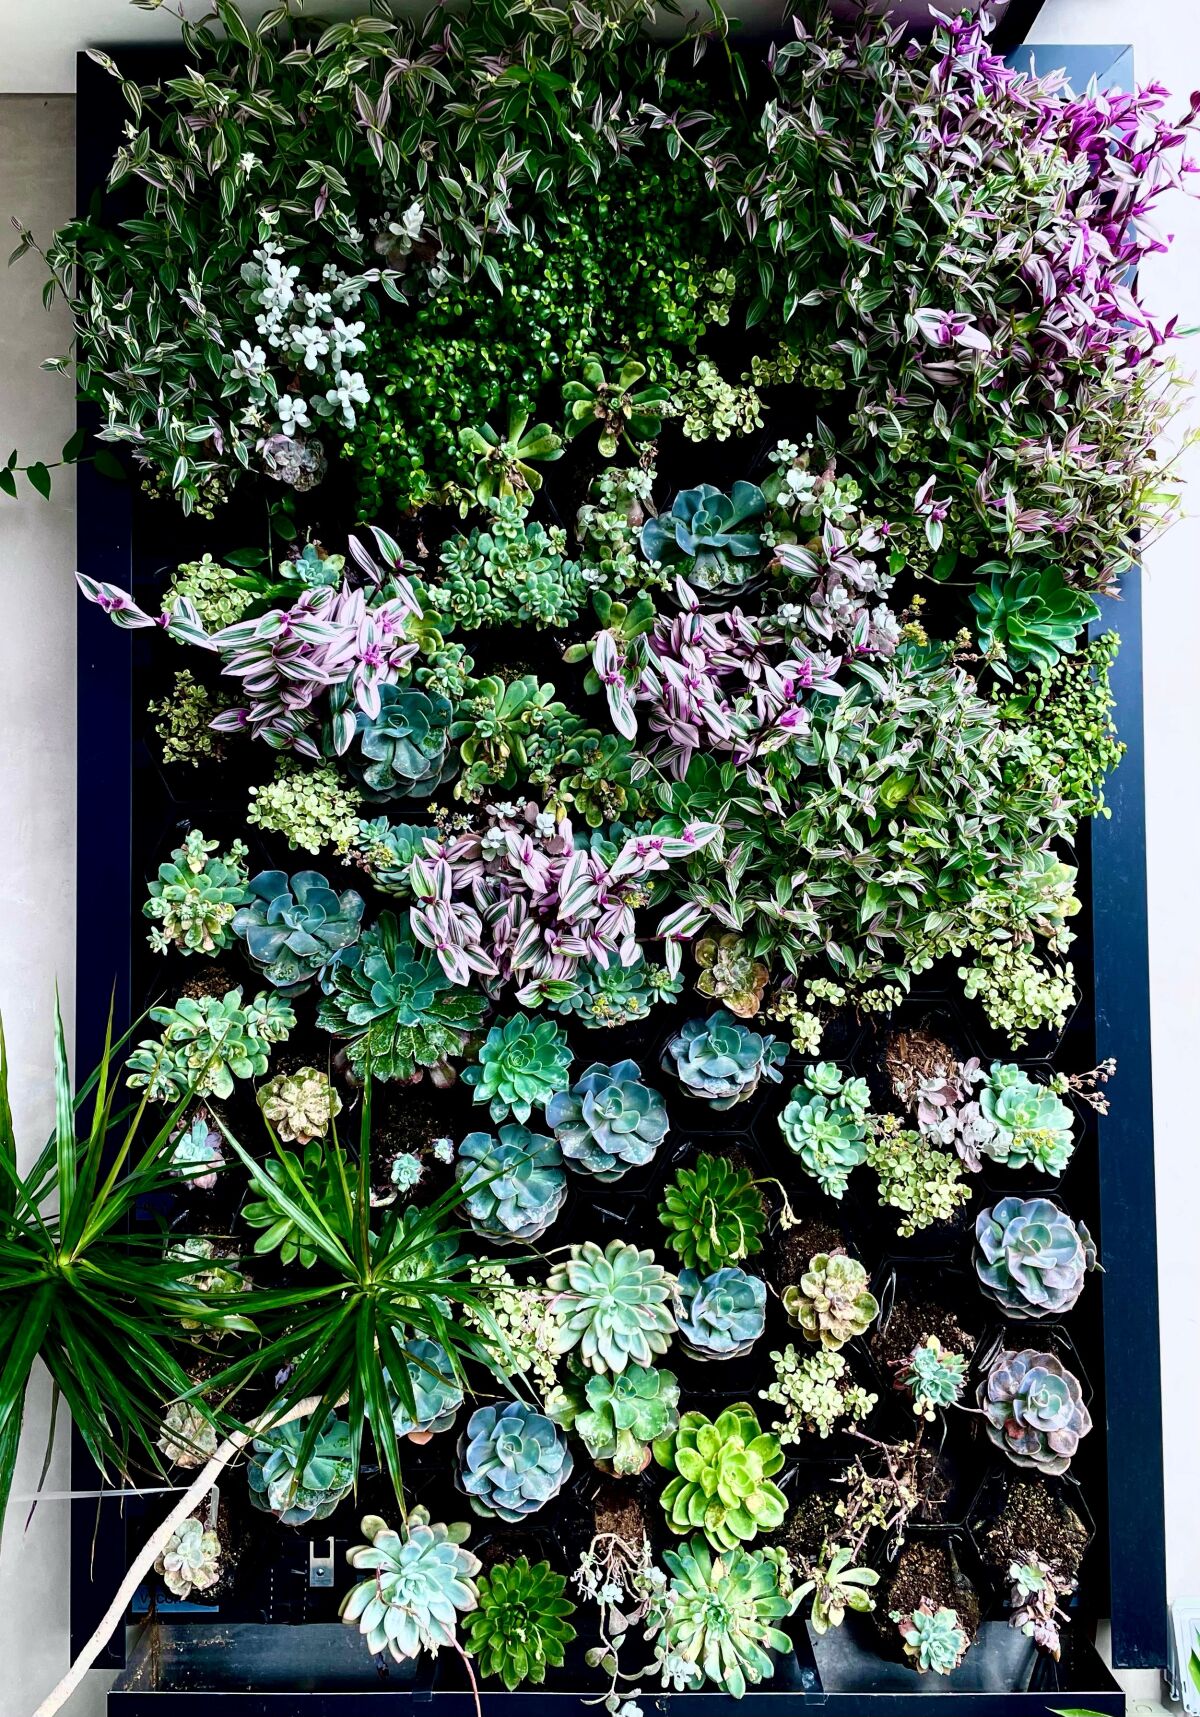 A variety of plants form a living wall in this garden.